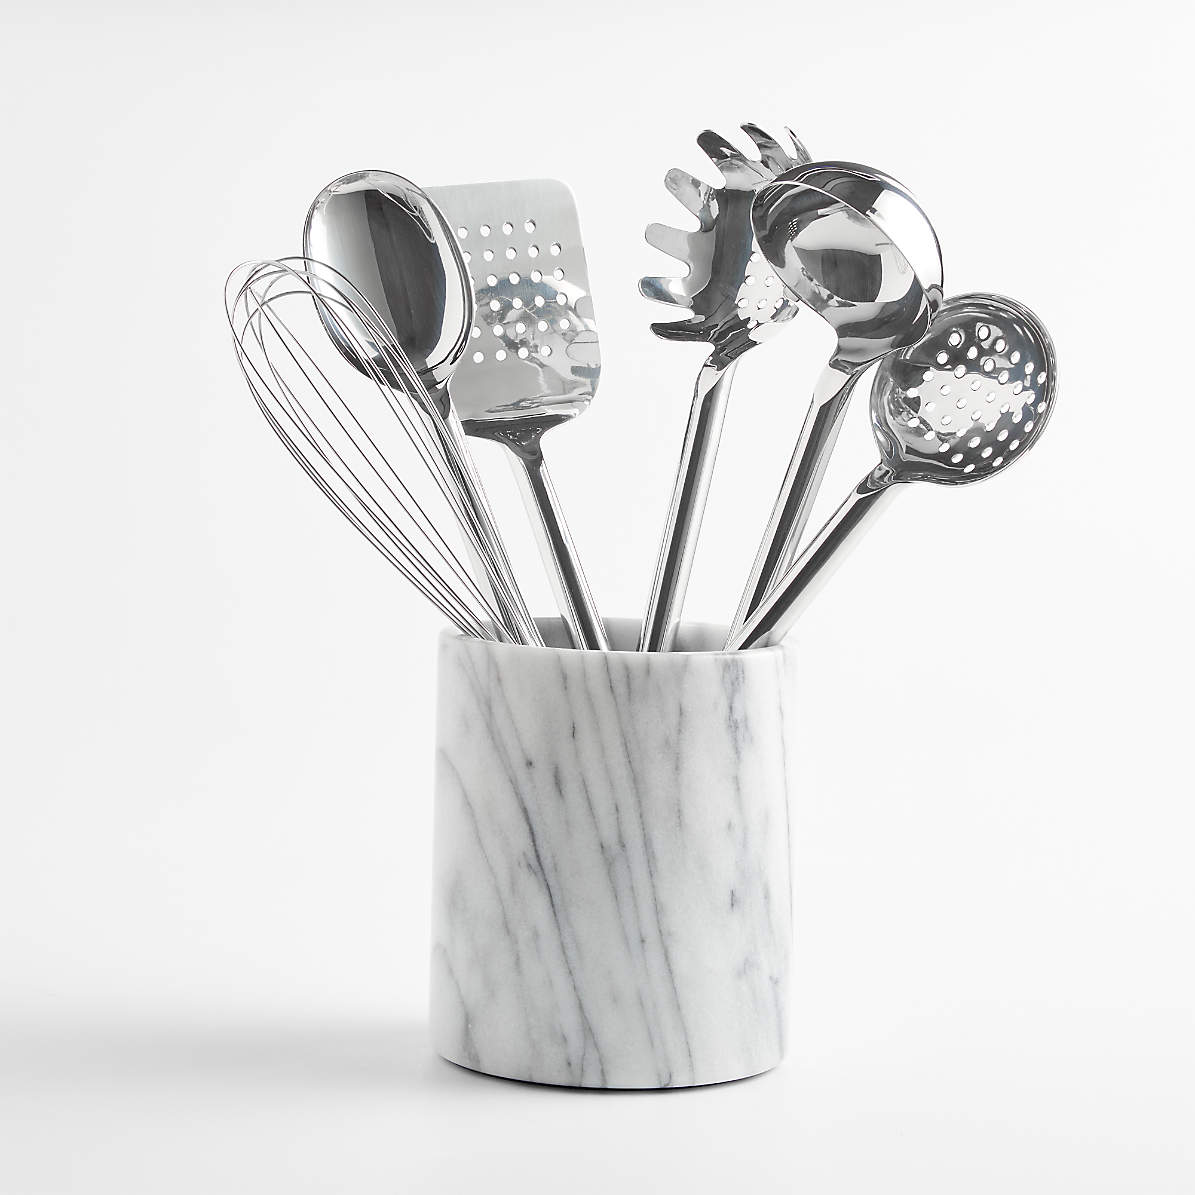 OXO Good Grips 6-Piece Kitchen Utensils Set with Holder + Reviews, Crate &  Barrel